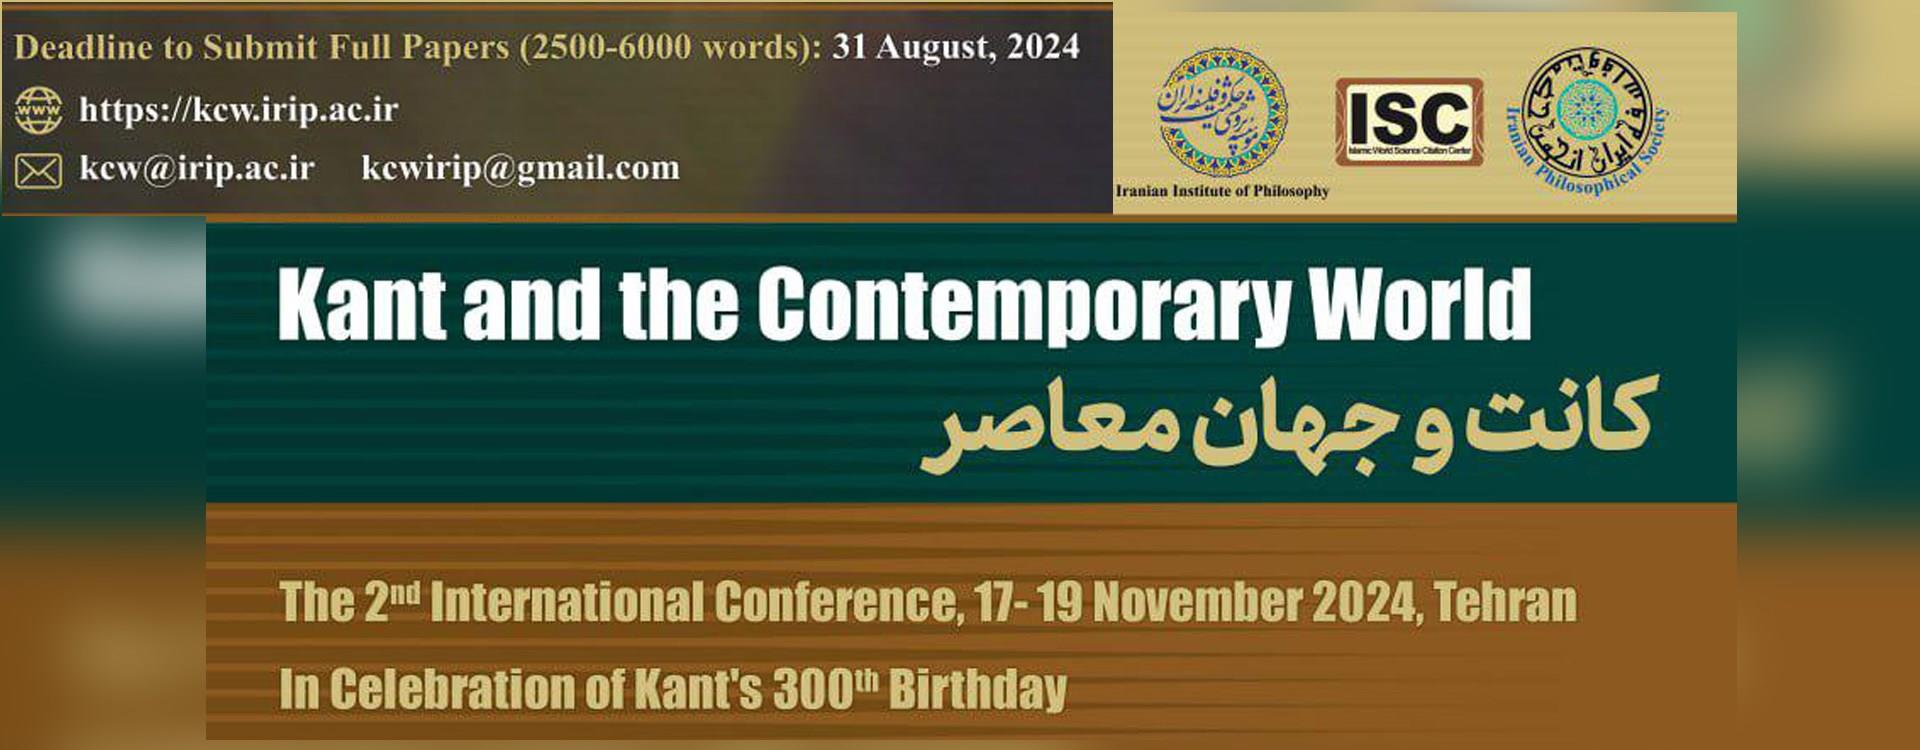 International Conference On Kant&#39;s thought to celebrate his 300th birthday on World Philosophy Day